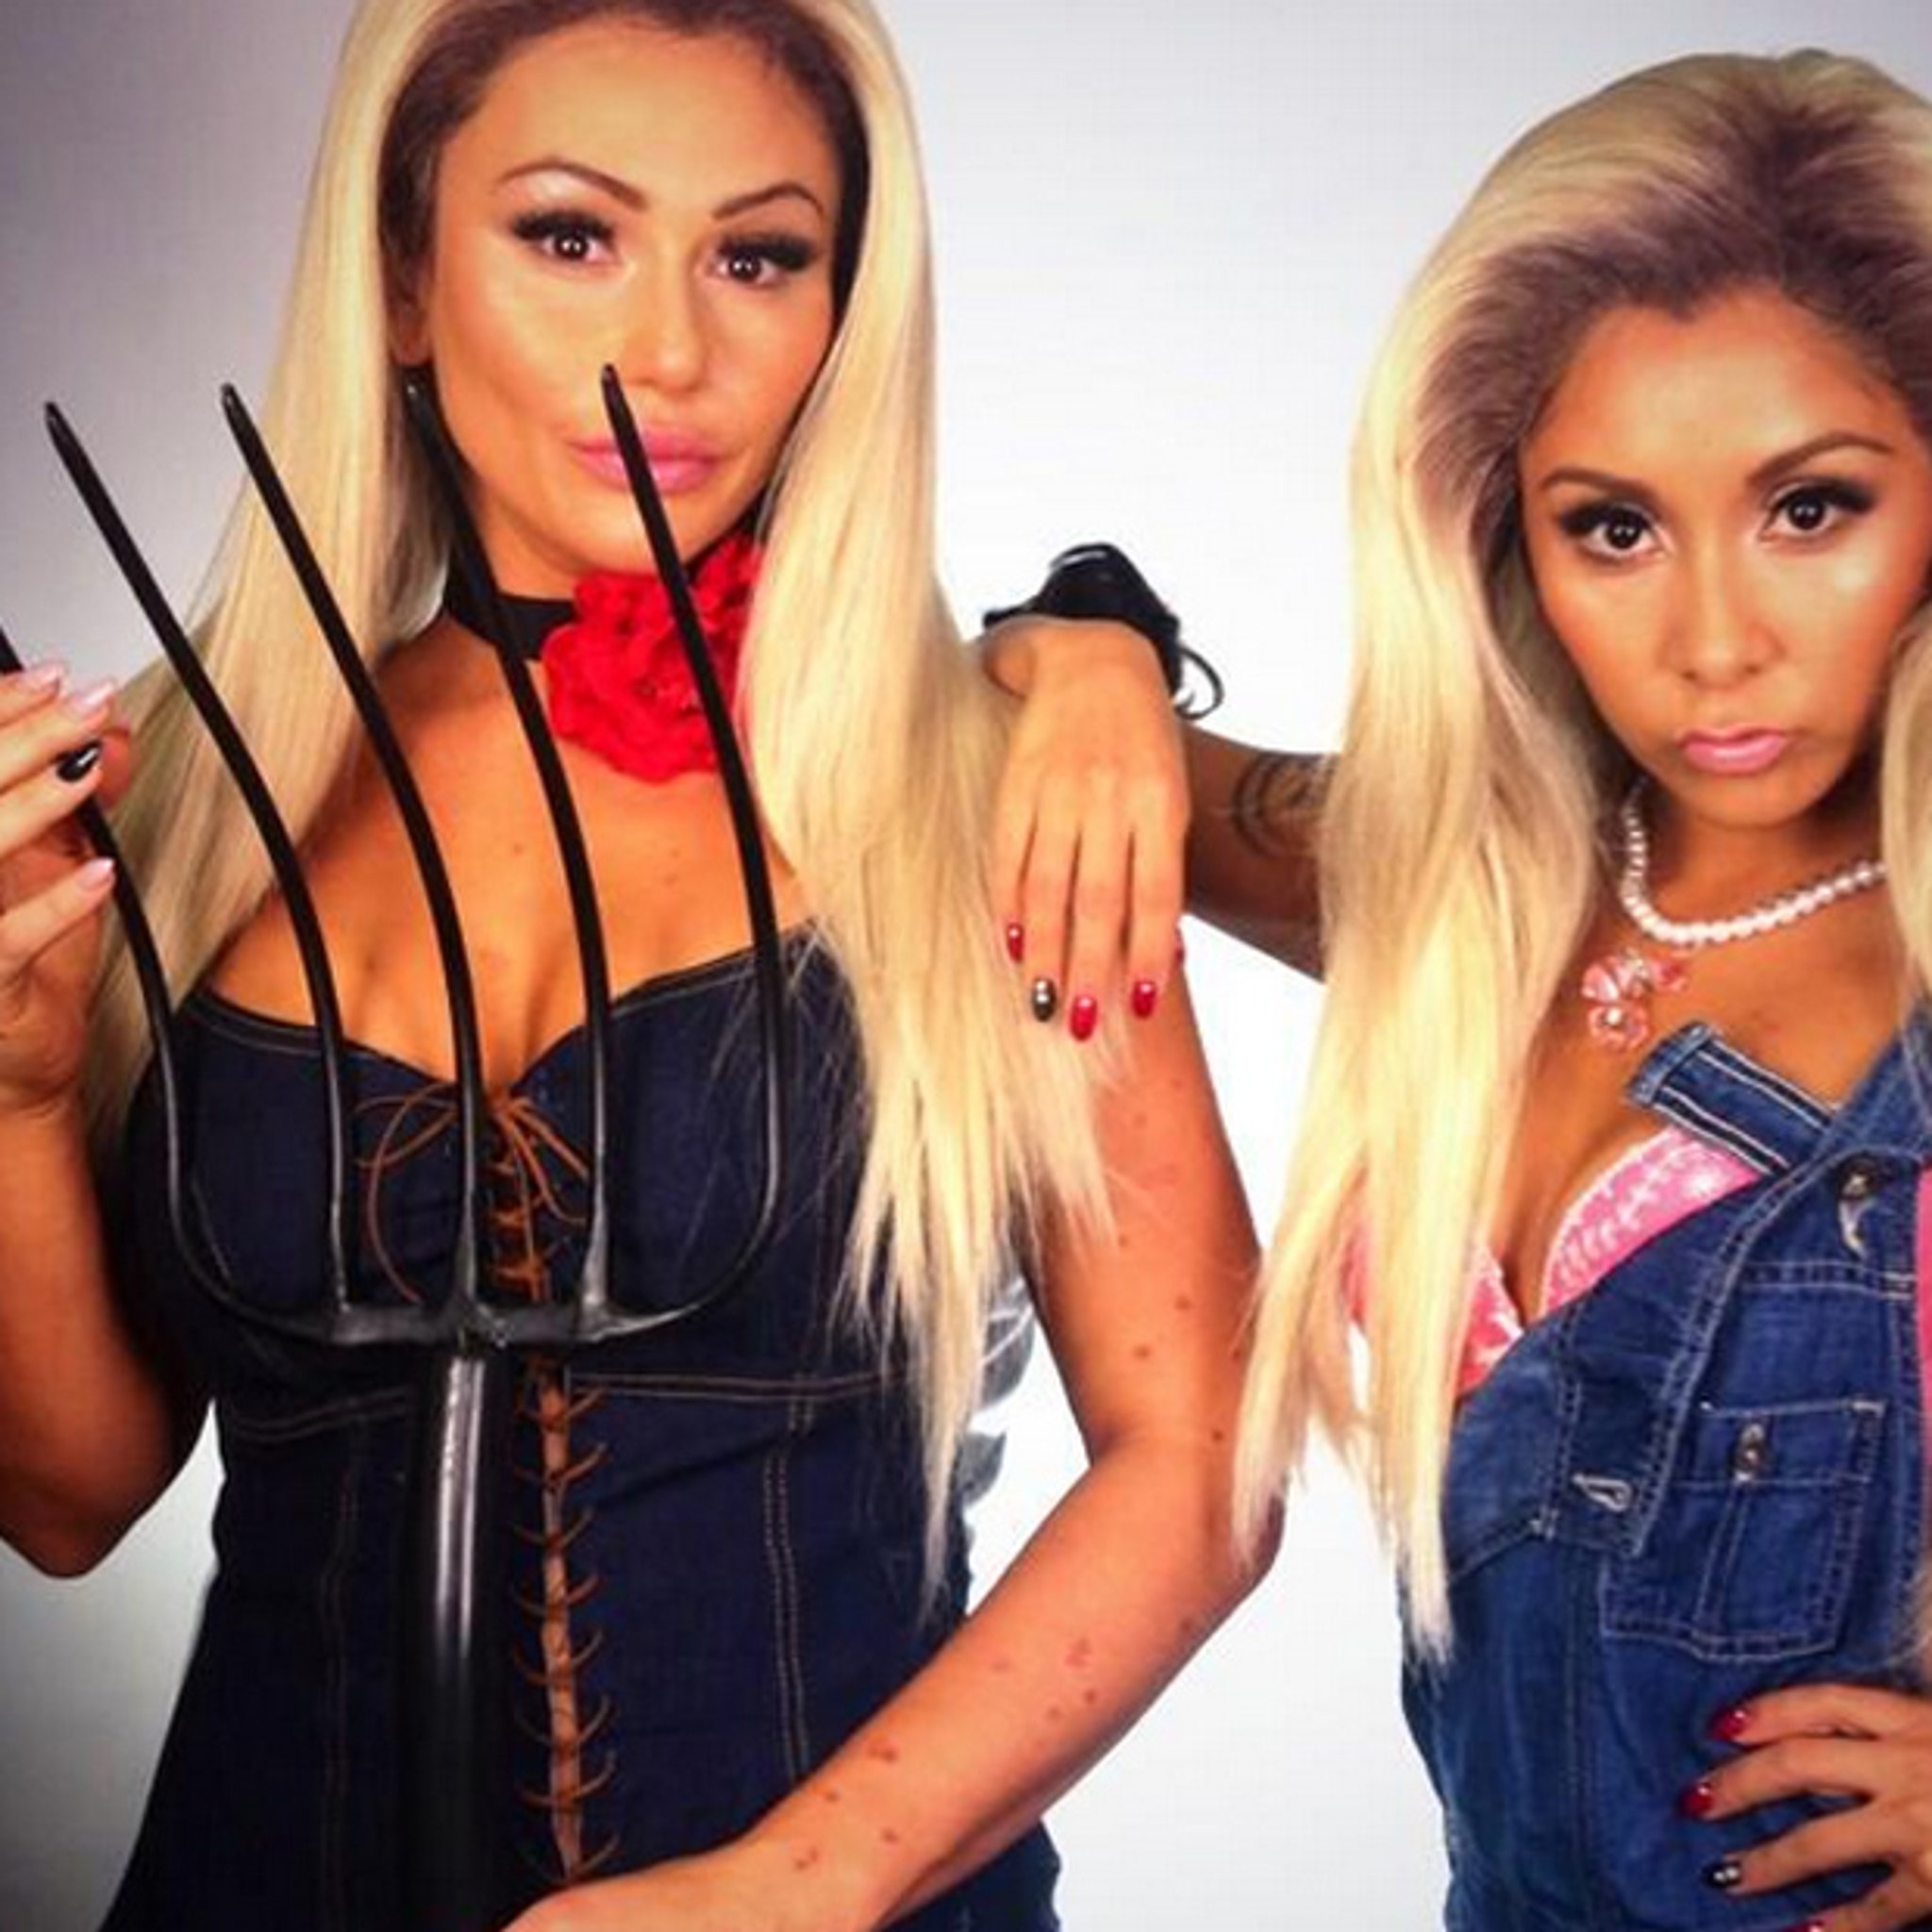 Schwing? Snooki and JWoww dress up as classic TV couplings 